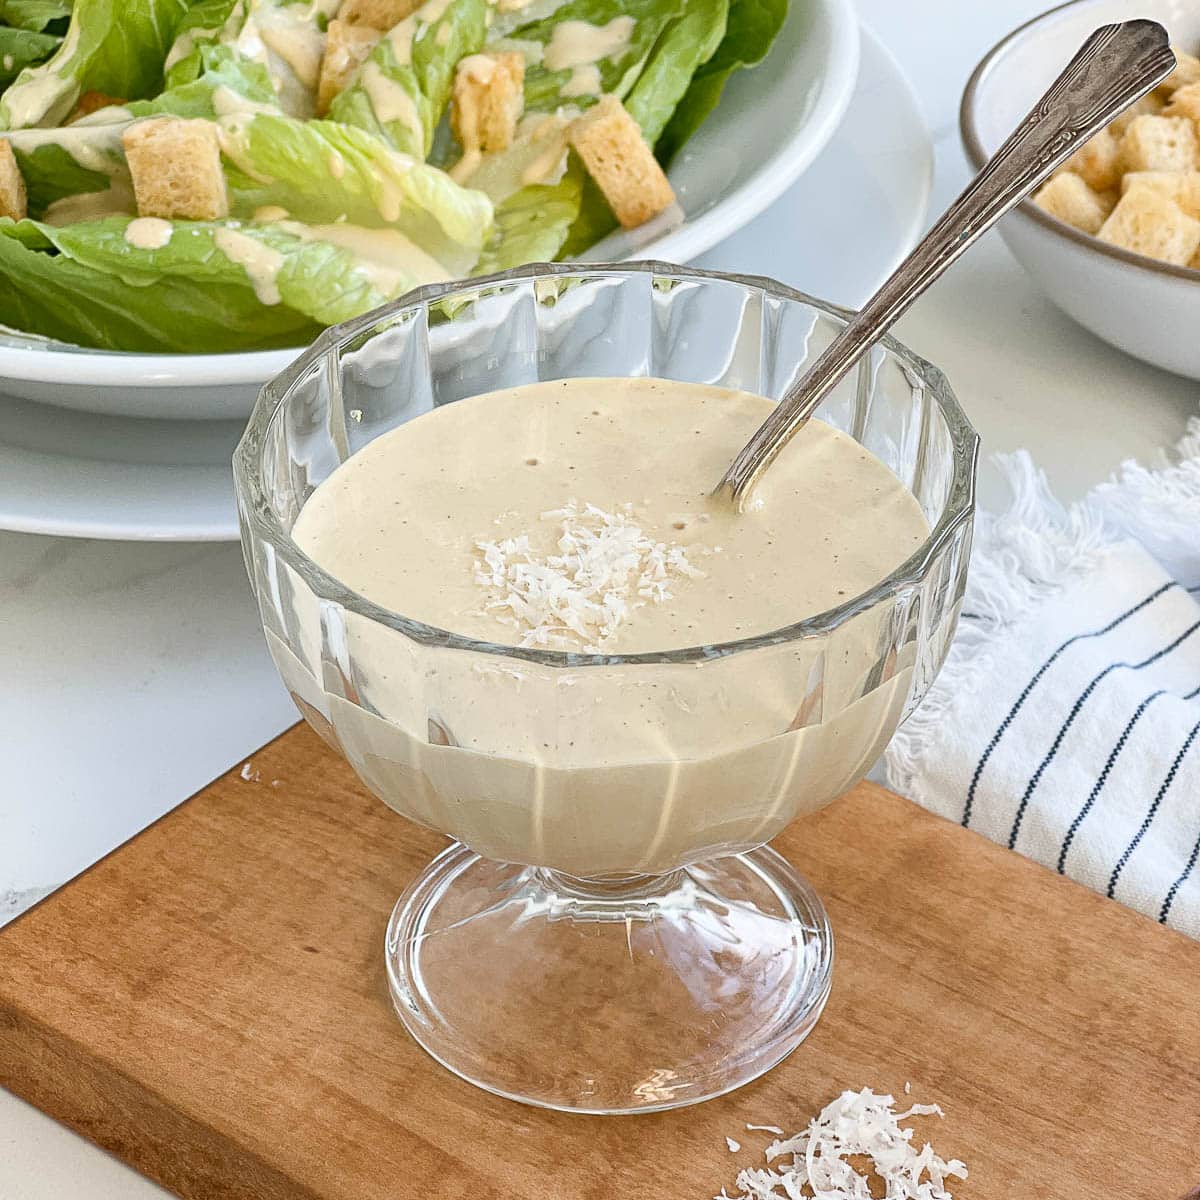 A bowl of caesar dressing with spoon.